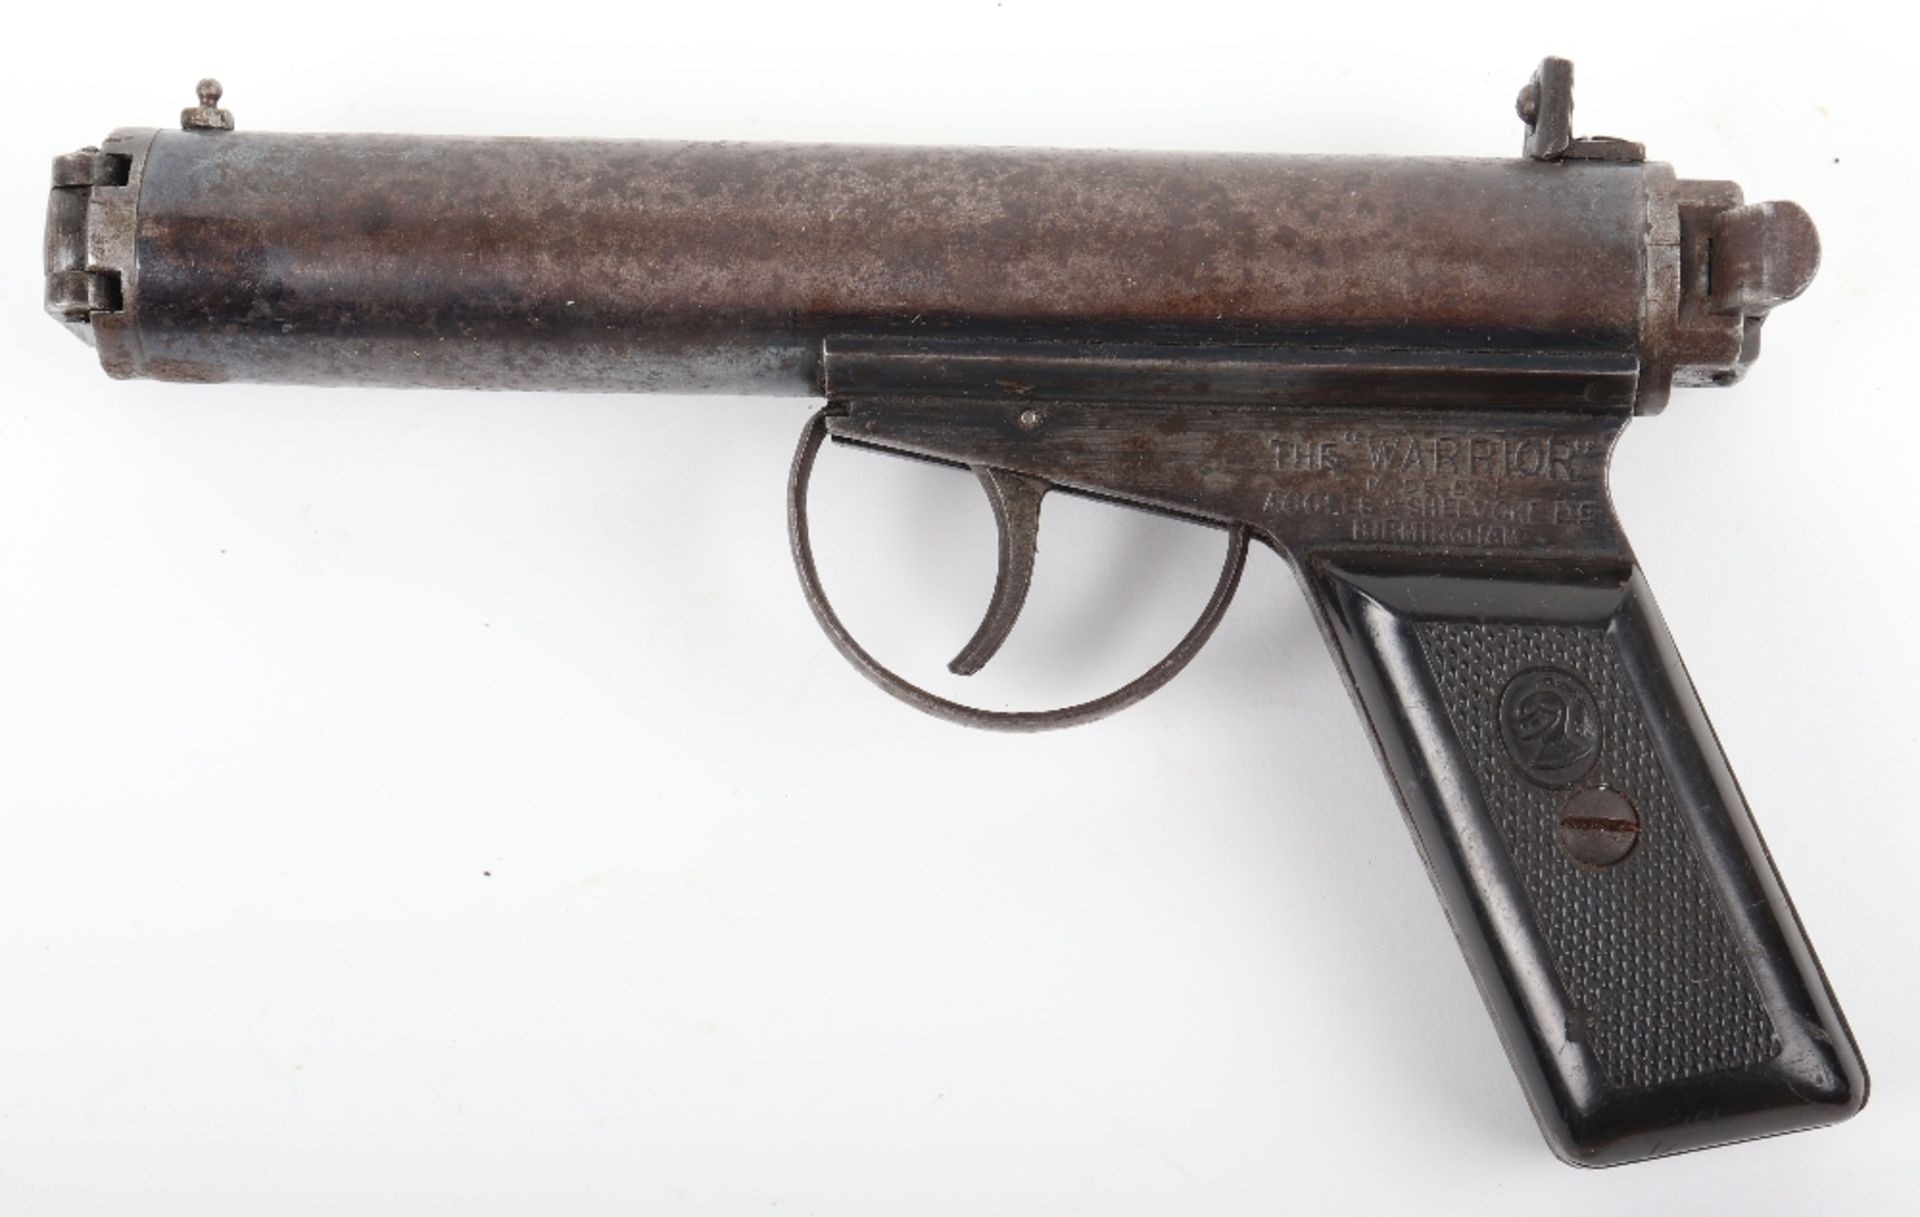 Scarce .22” Warrior Side-Lever Cocking Air Pistol No. 1921 - Image 5 of 8